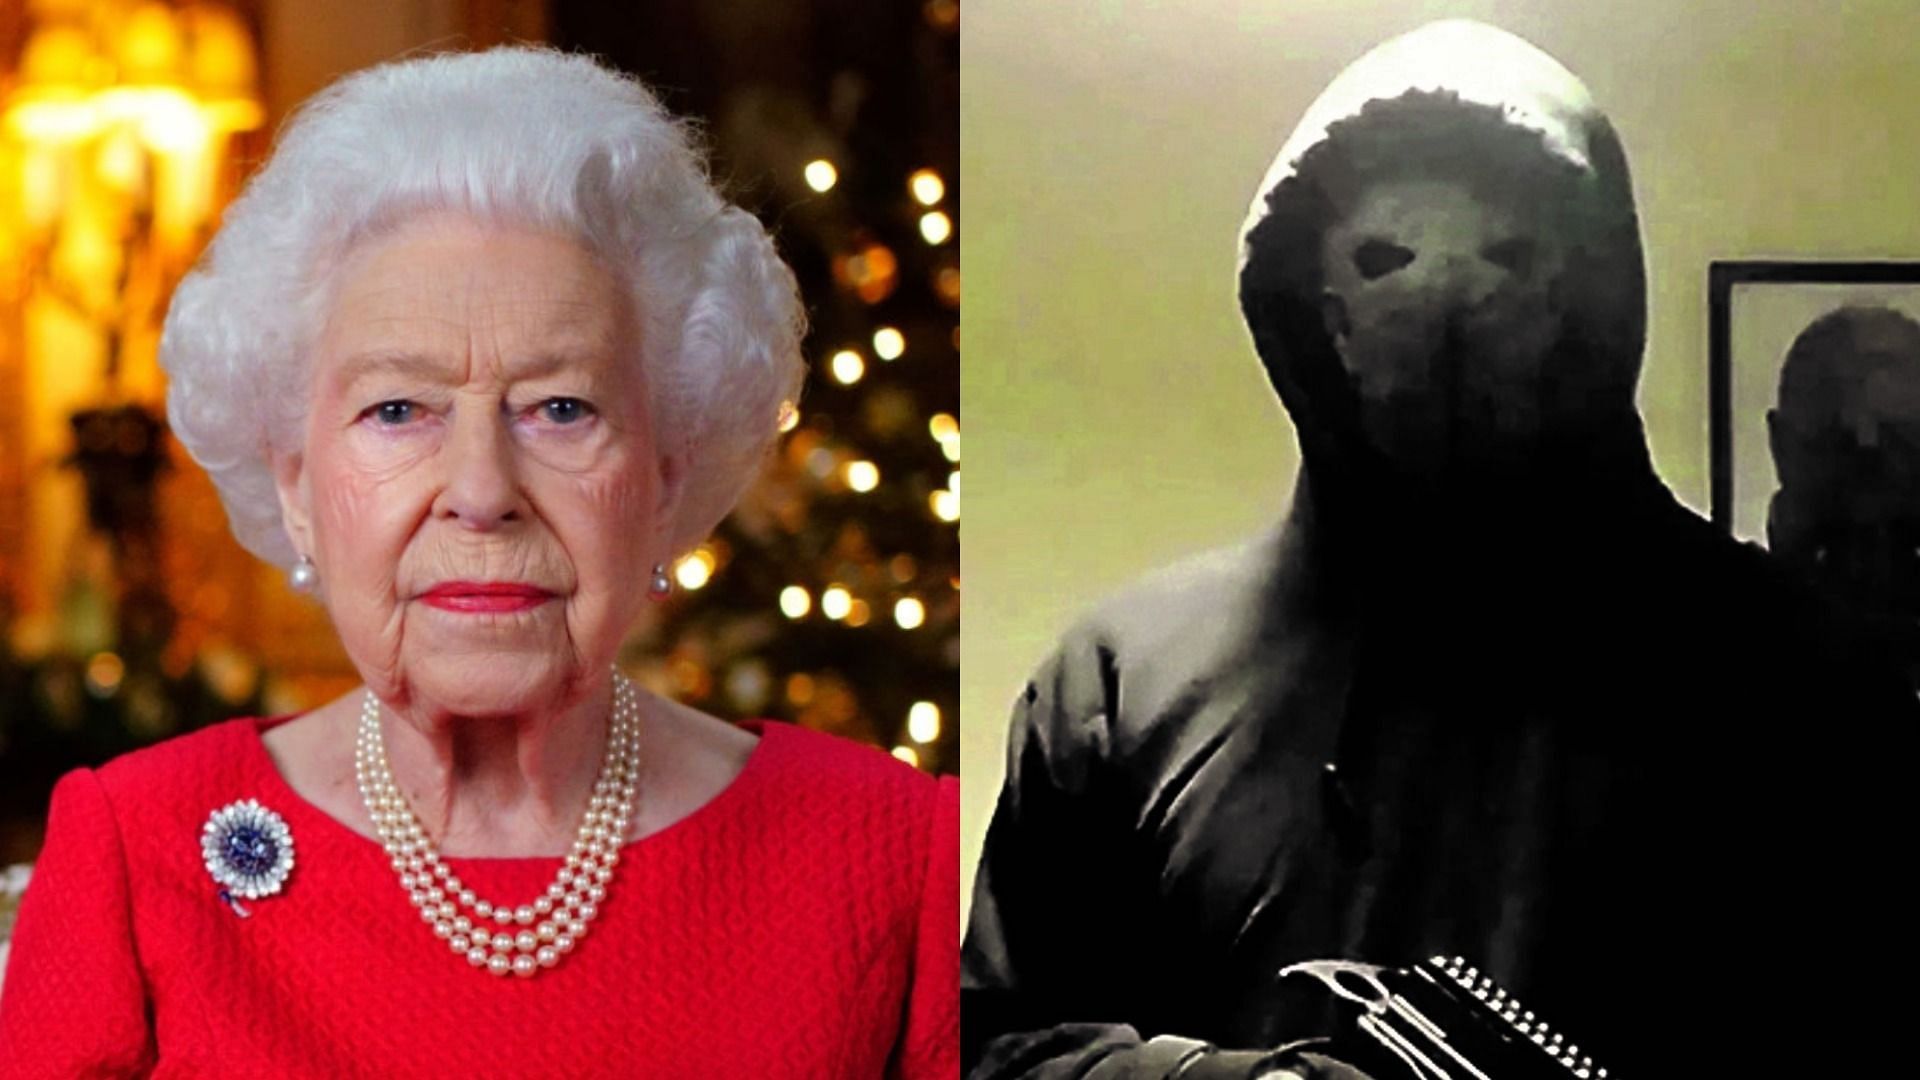 Jaswant Singh Chail reportedly disguised as a masked man and threatened to assassinate Queen Elizabeth (Image via Victoria Jones/Getty Images and Jaswant Singh Chail/Snapchat)